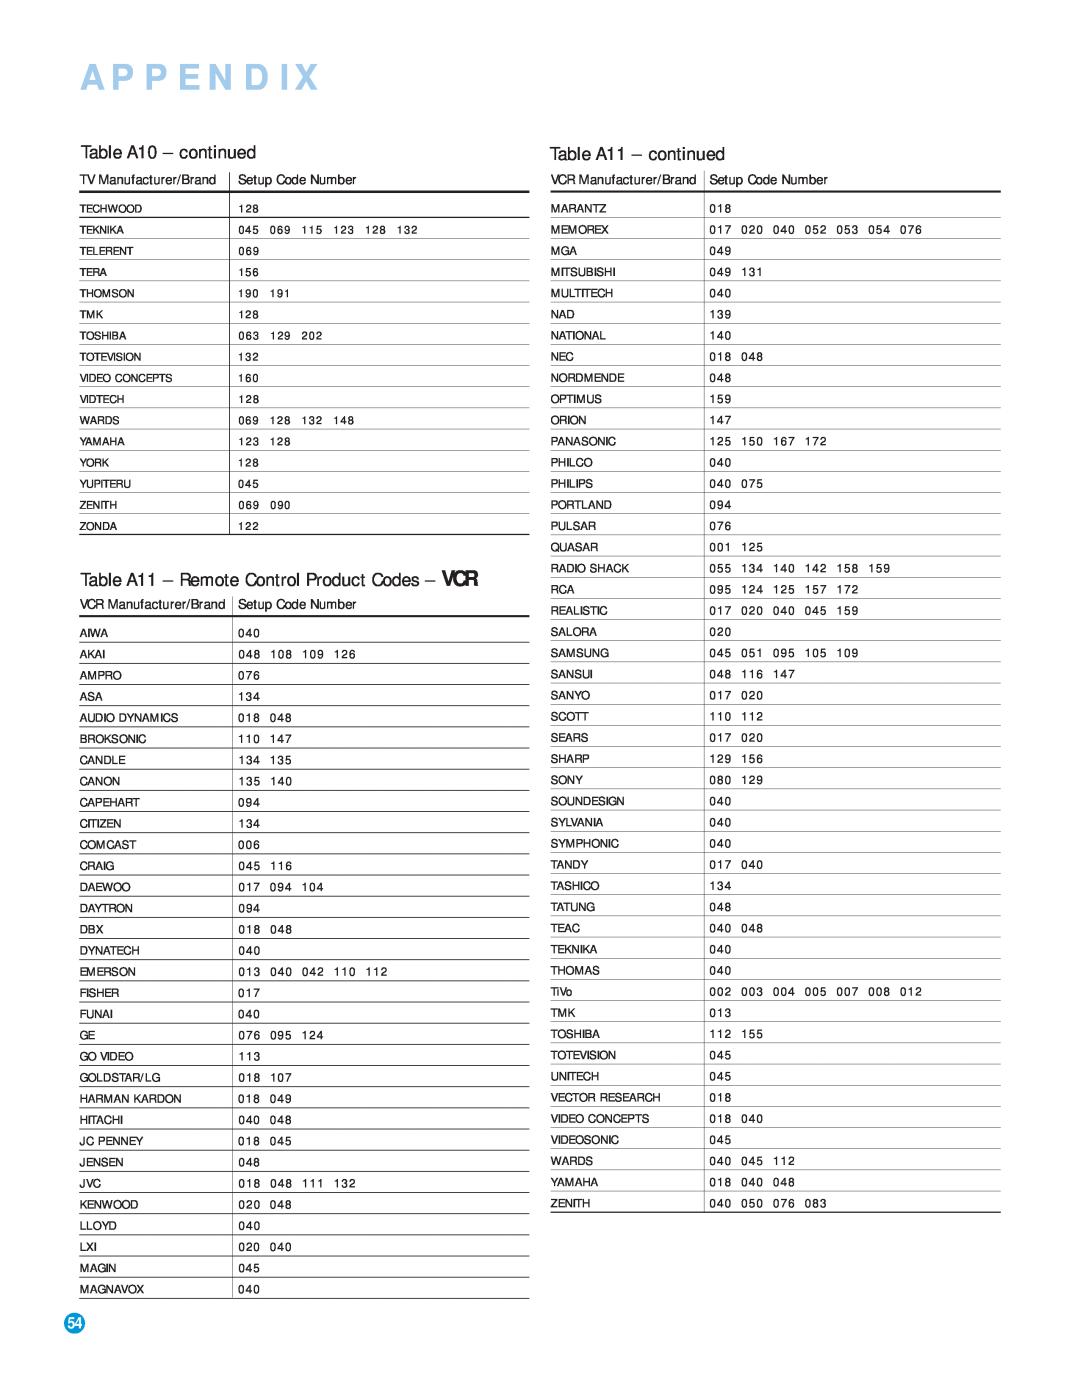 Harman-Kardon AVR 154 owner manual Table A10 - continued, Table A11 - continued, Appendix 